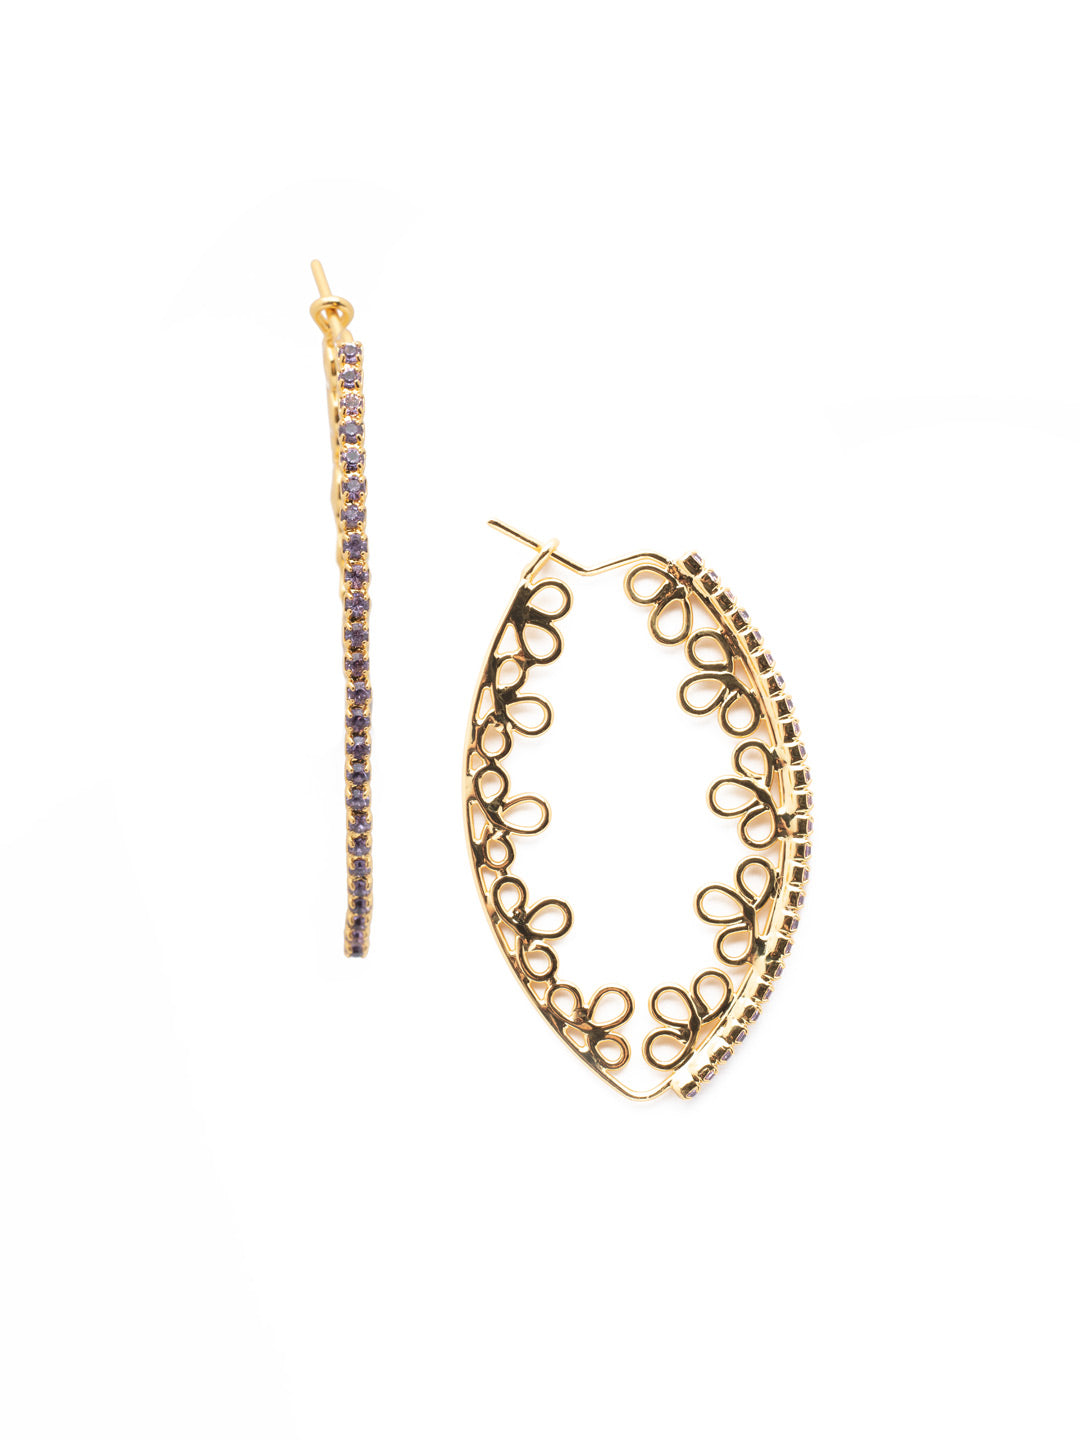 Gardenia Hoop Earrings - EES131BGSPR - <p>The Gardenia Statement Hoop Earrings are spring showstoppers. Rimmed in sparkling crystals, the hand-soldered metalwork demands equal attention. Onlookers will be jealous. From Sorrelli's Spring Rain collection in our Bright Gold-tone finish.</p>